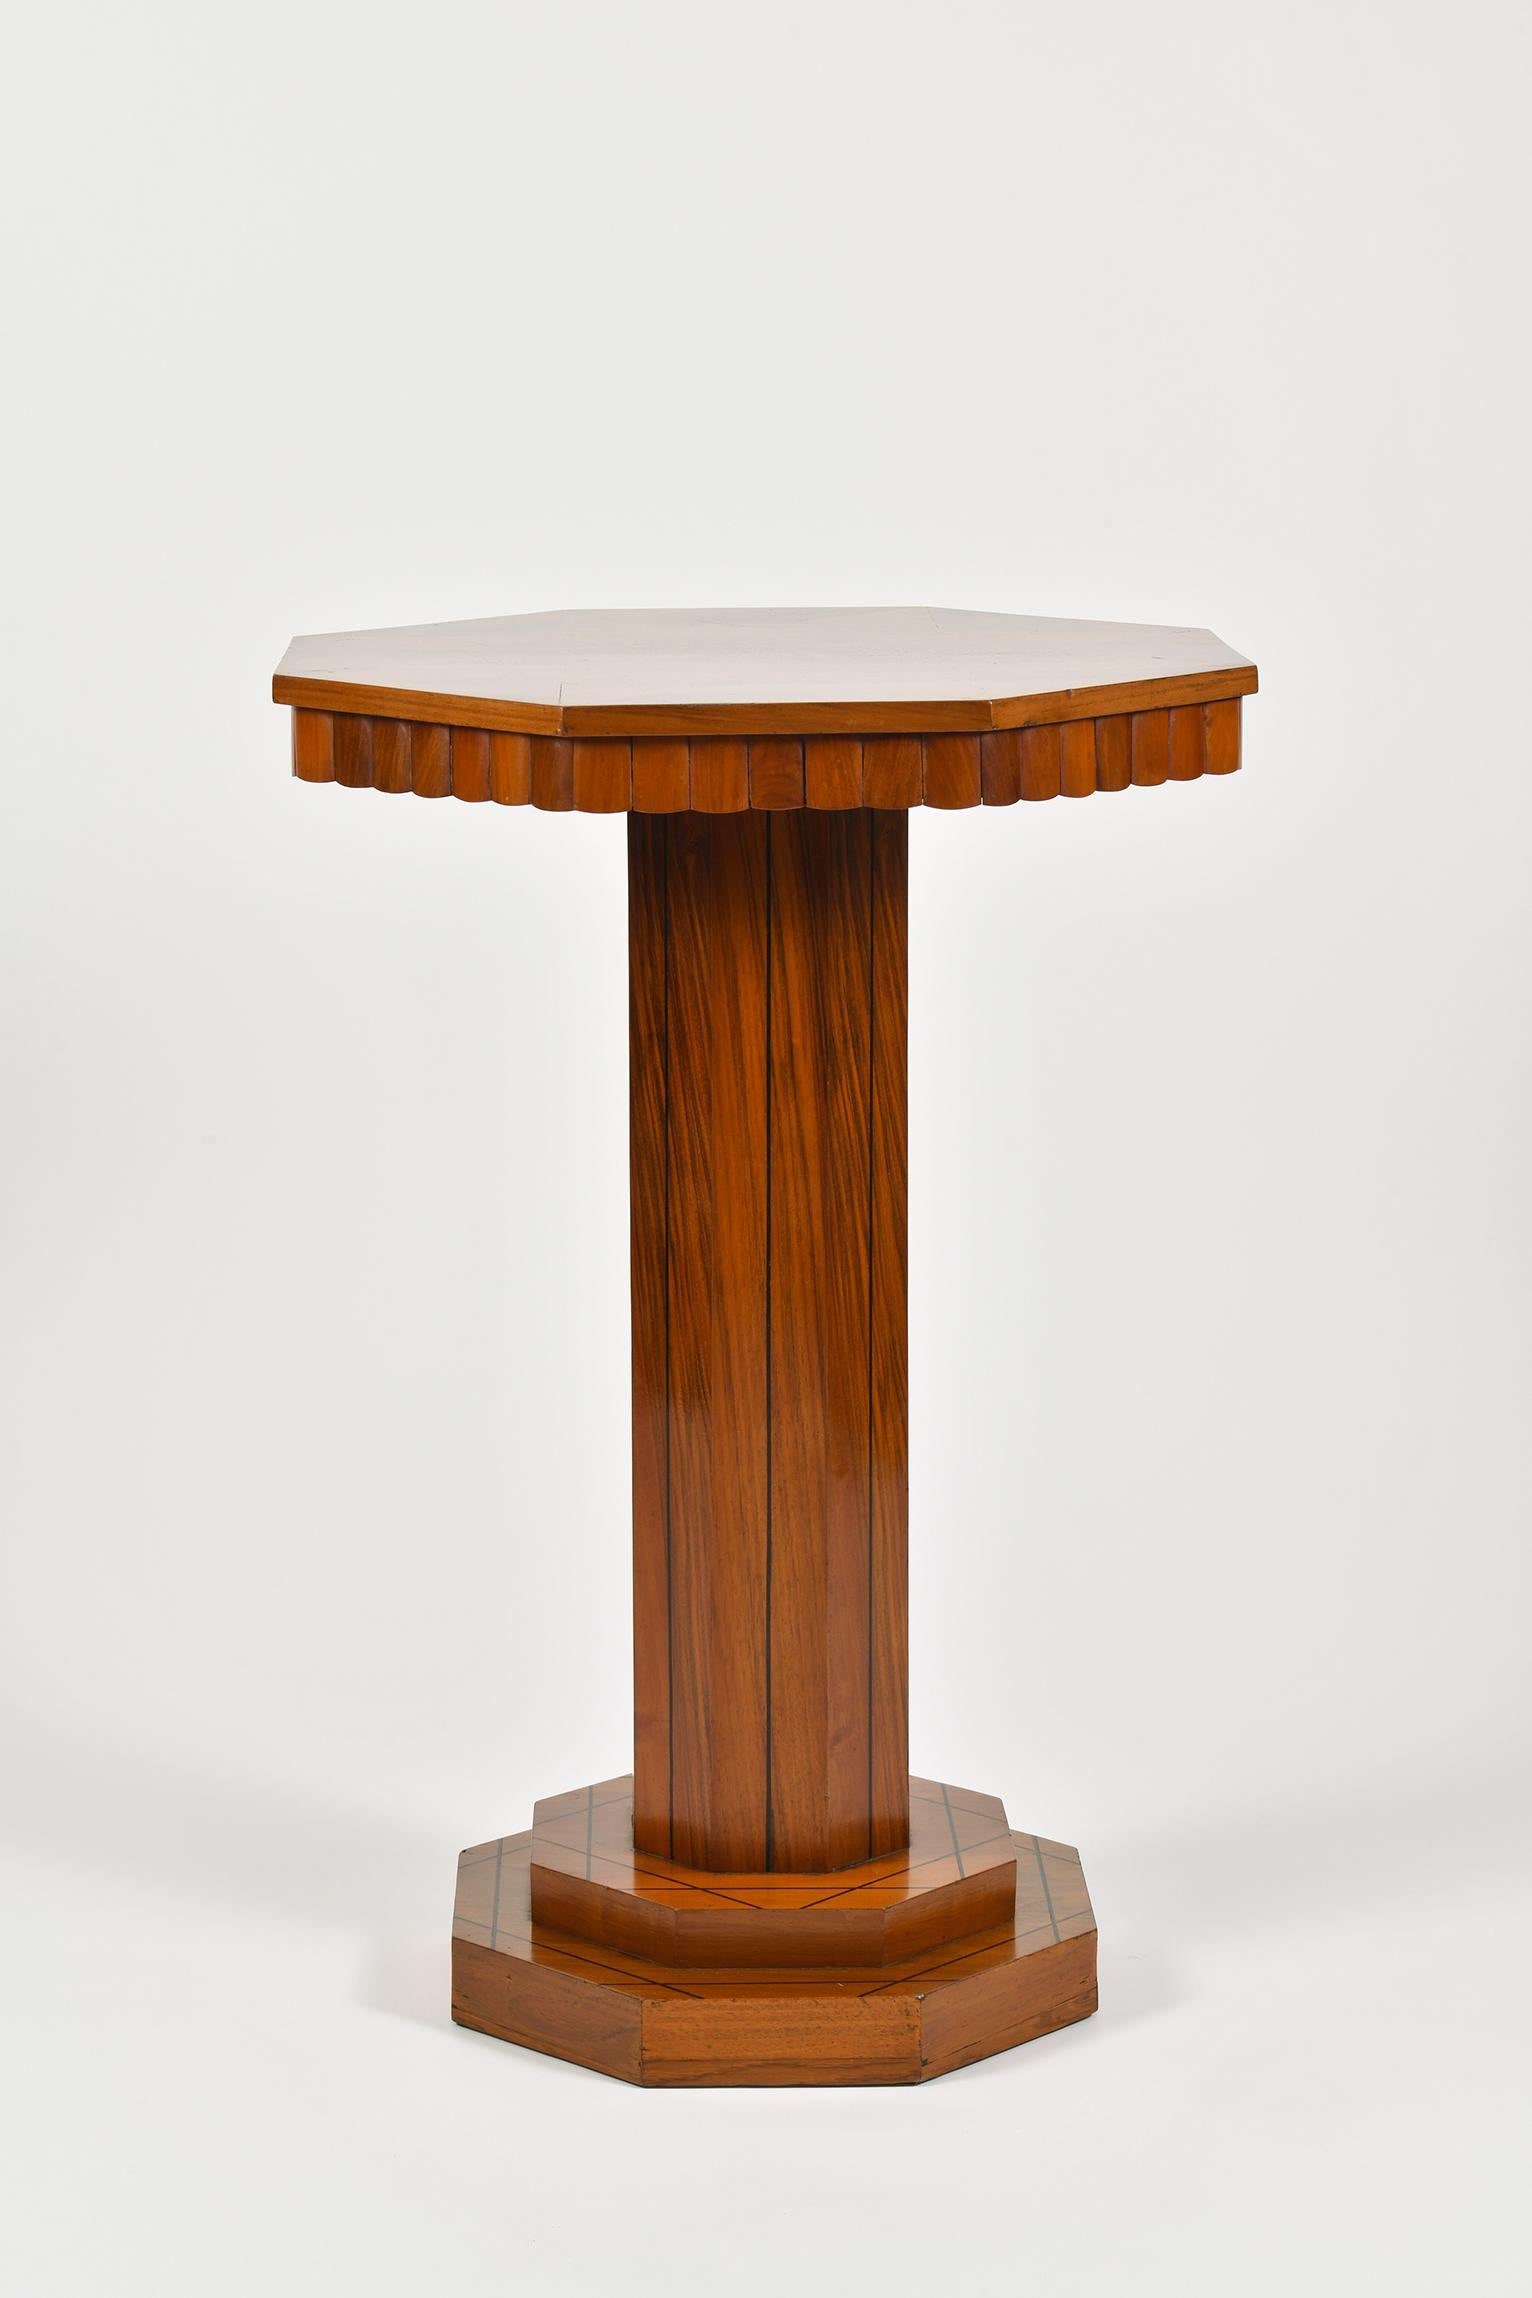 An Art Deco walnut and ebonised tall side table, the octagonal column stem resting on a double stepped plinth, supporting a star marquetry top with scalloped edges.
France, circa 1930.